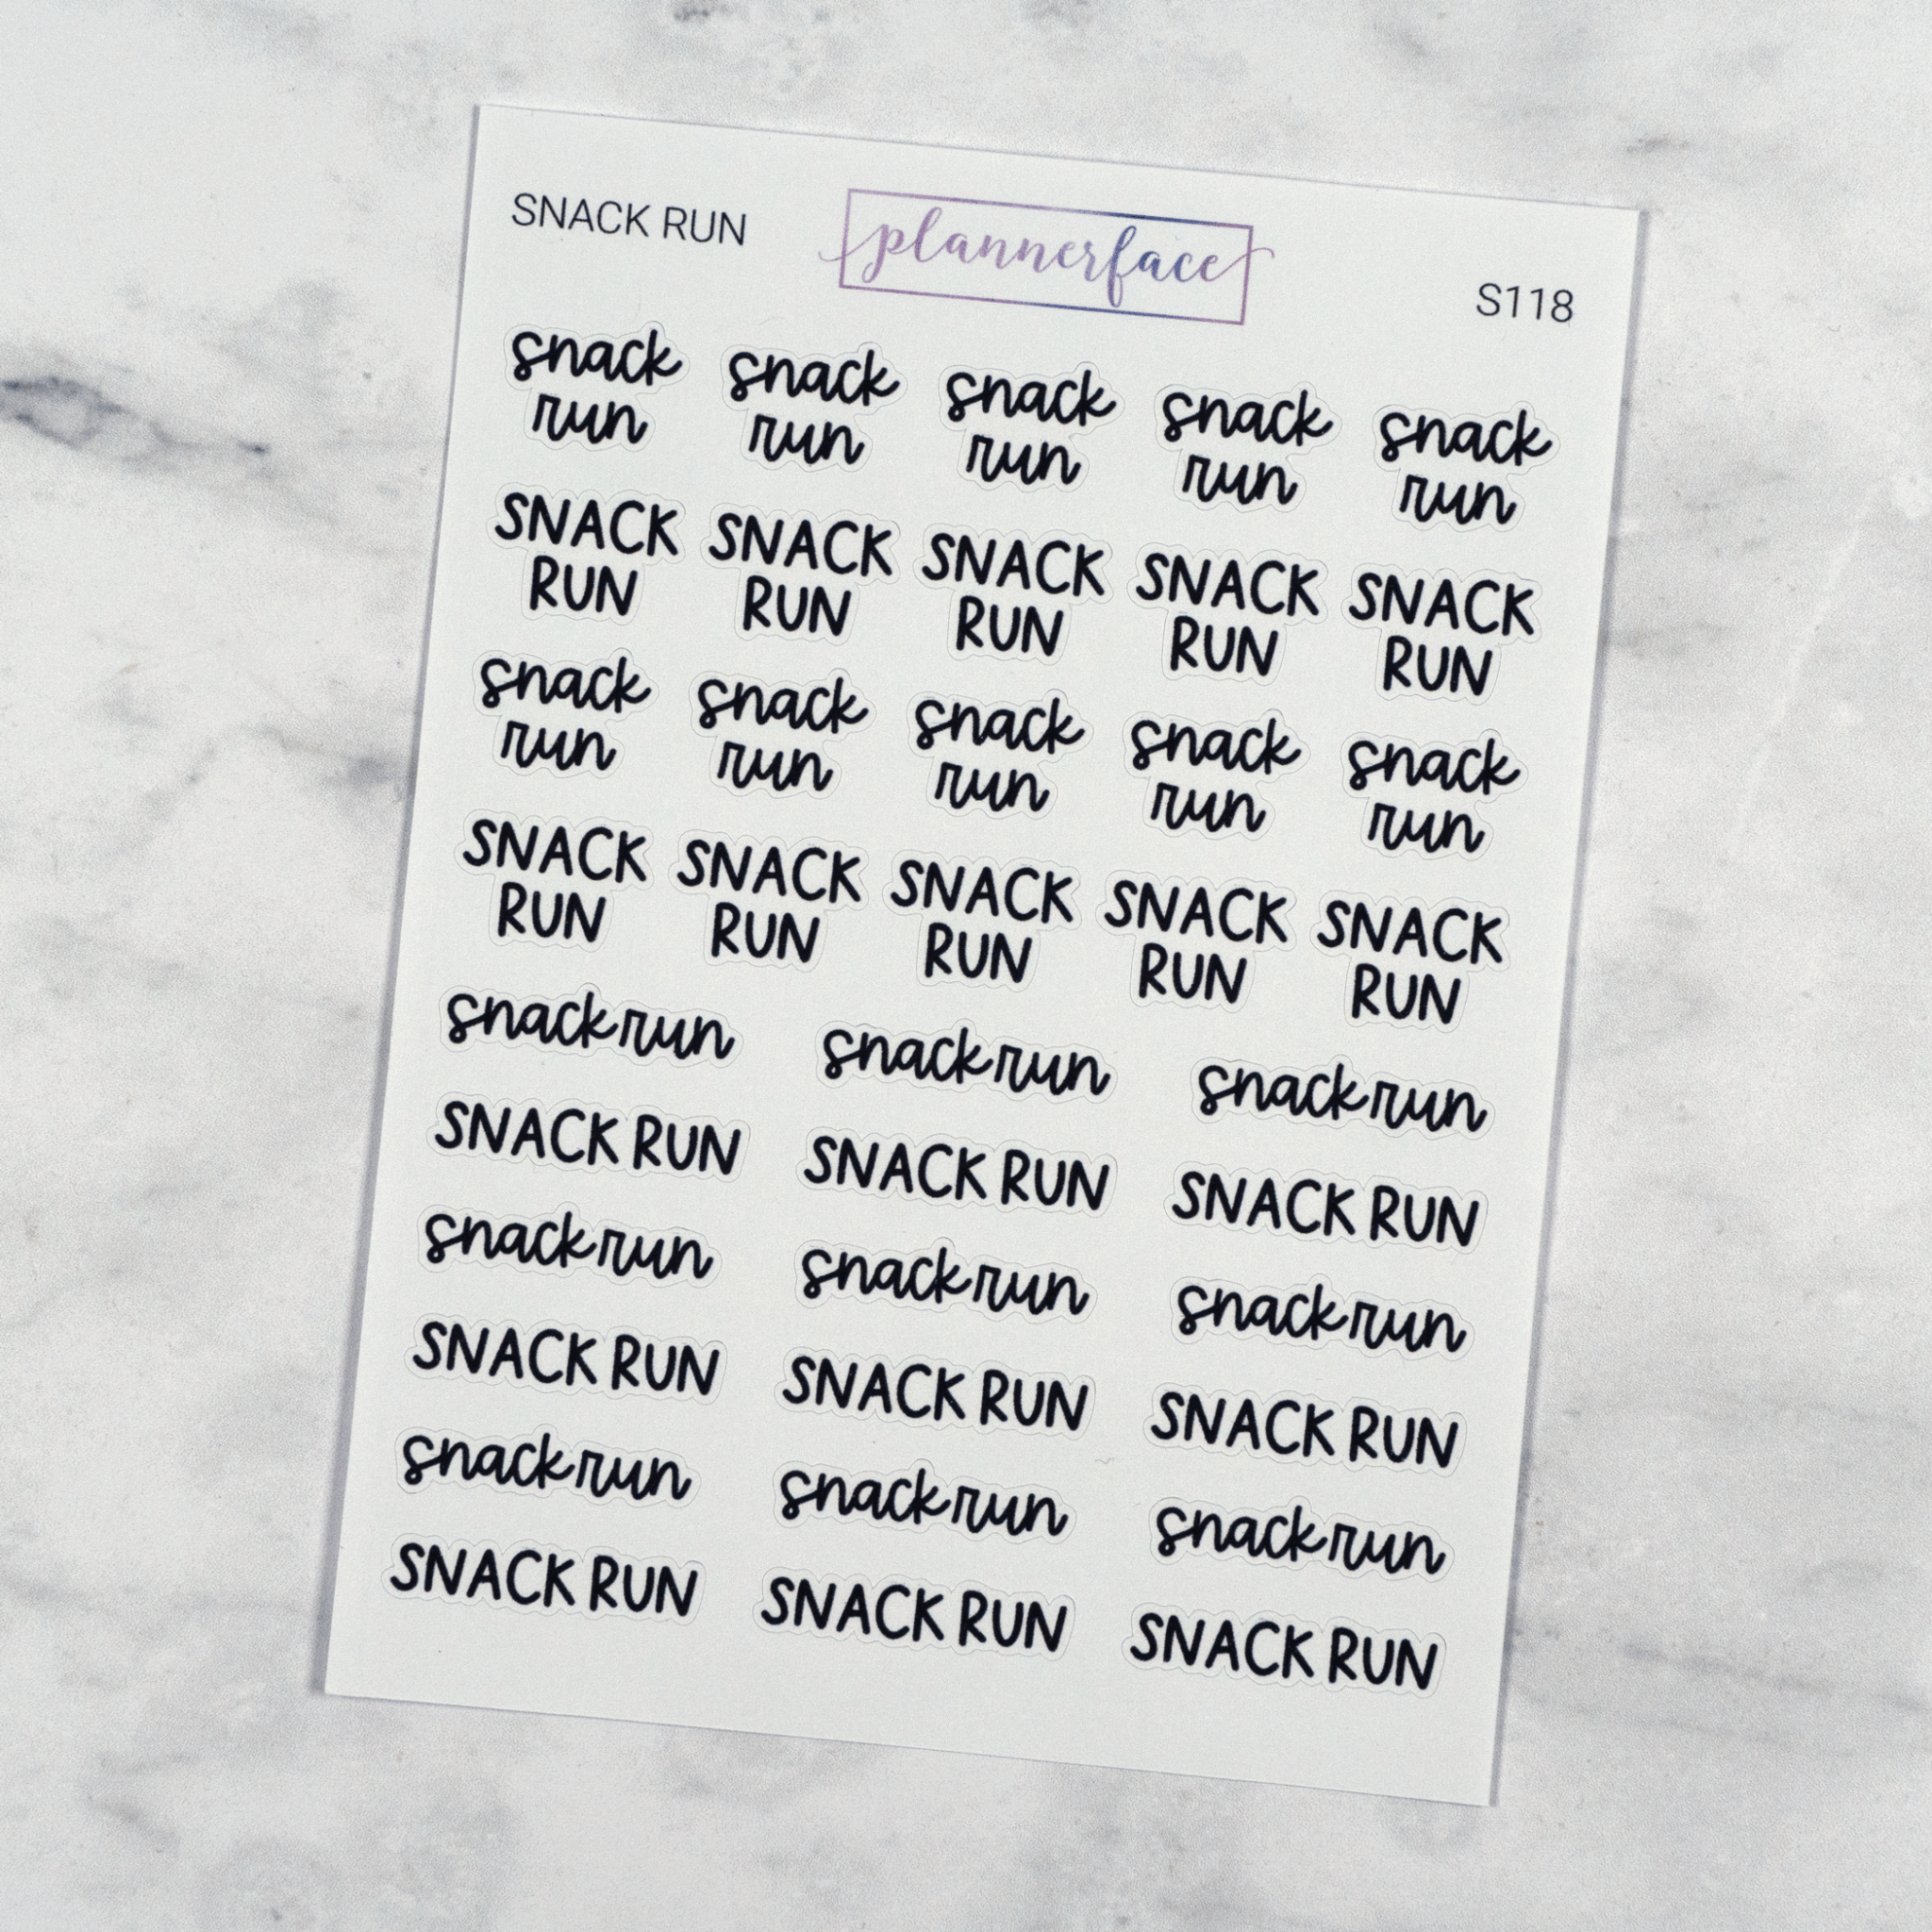 Snack Run | Scripts by Plannerface